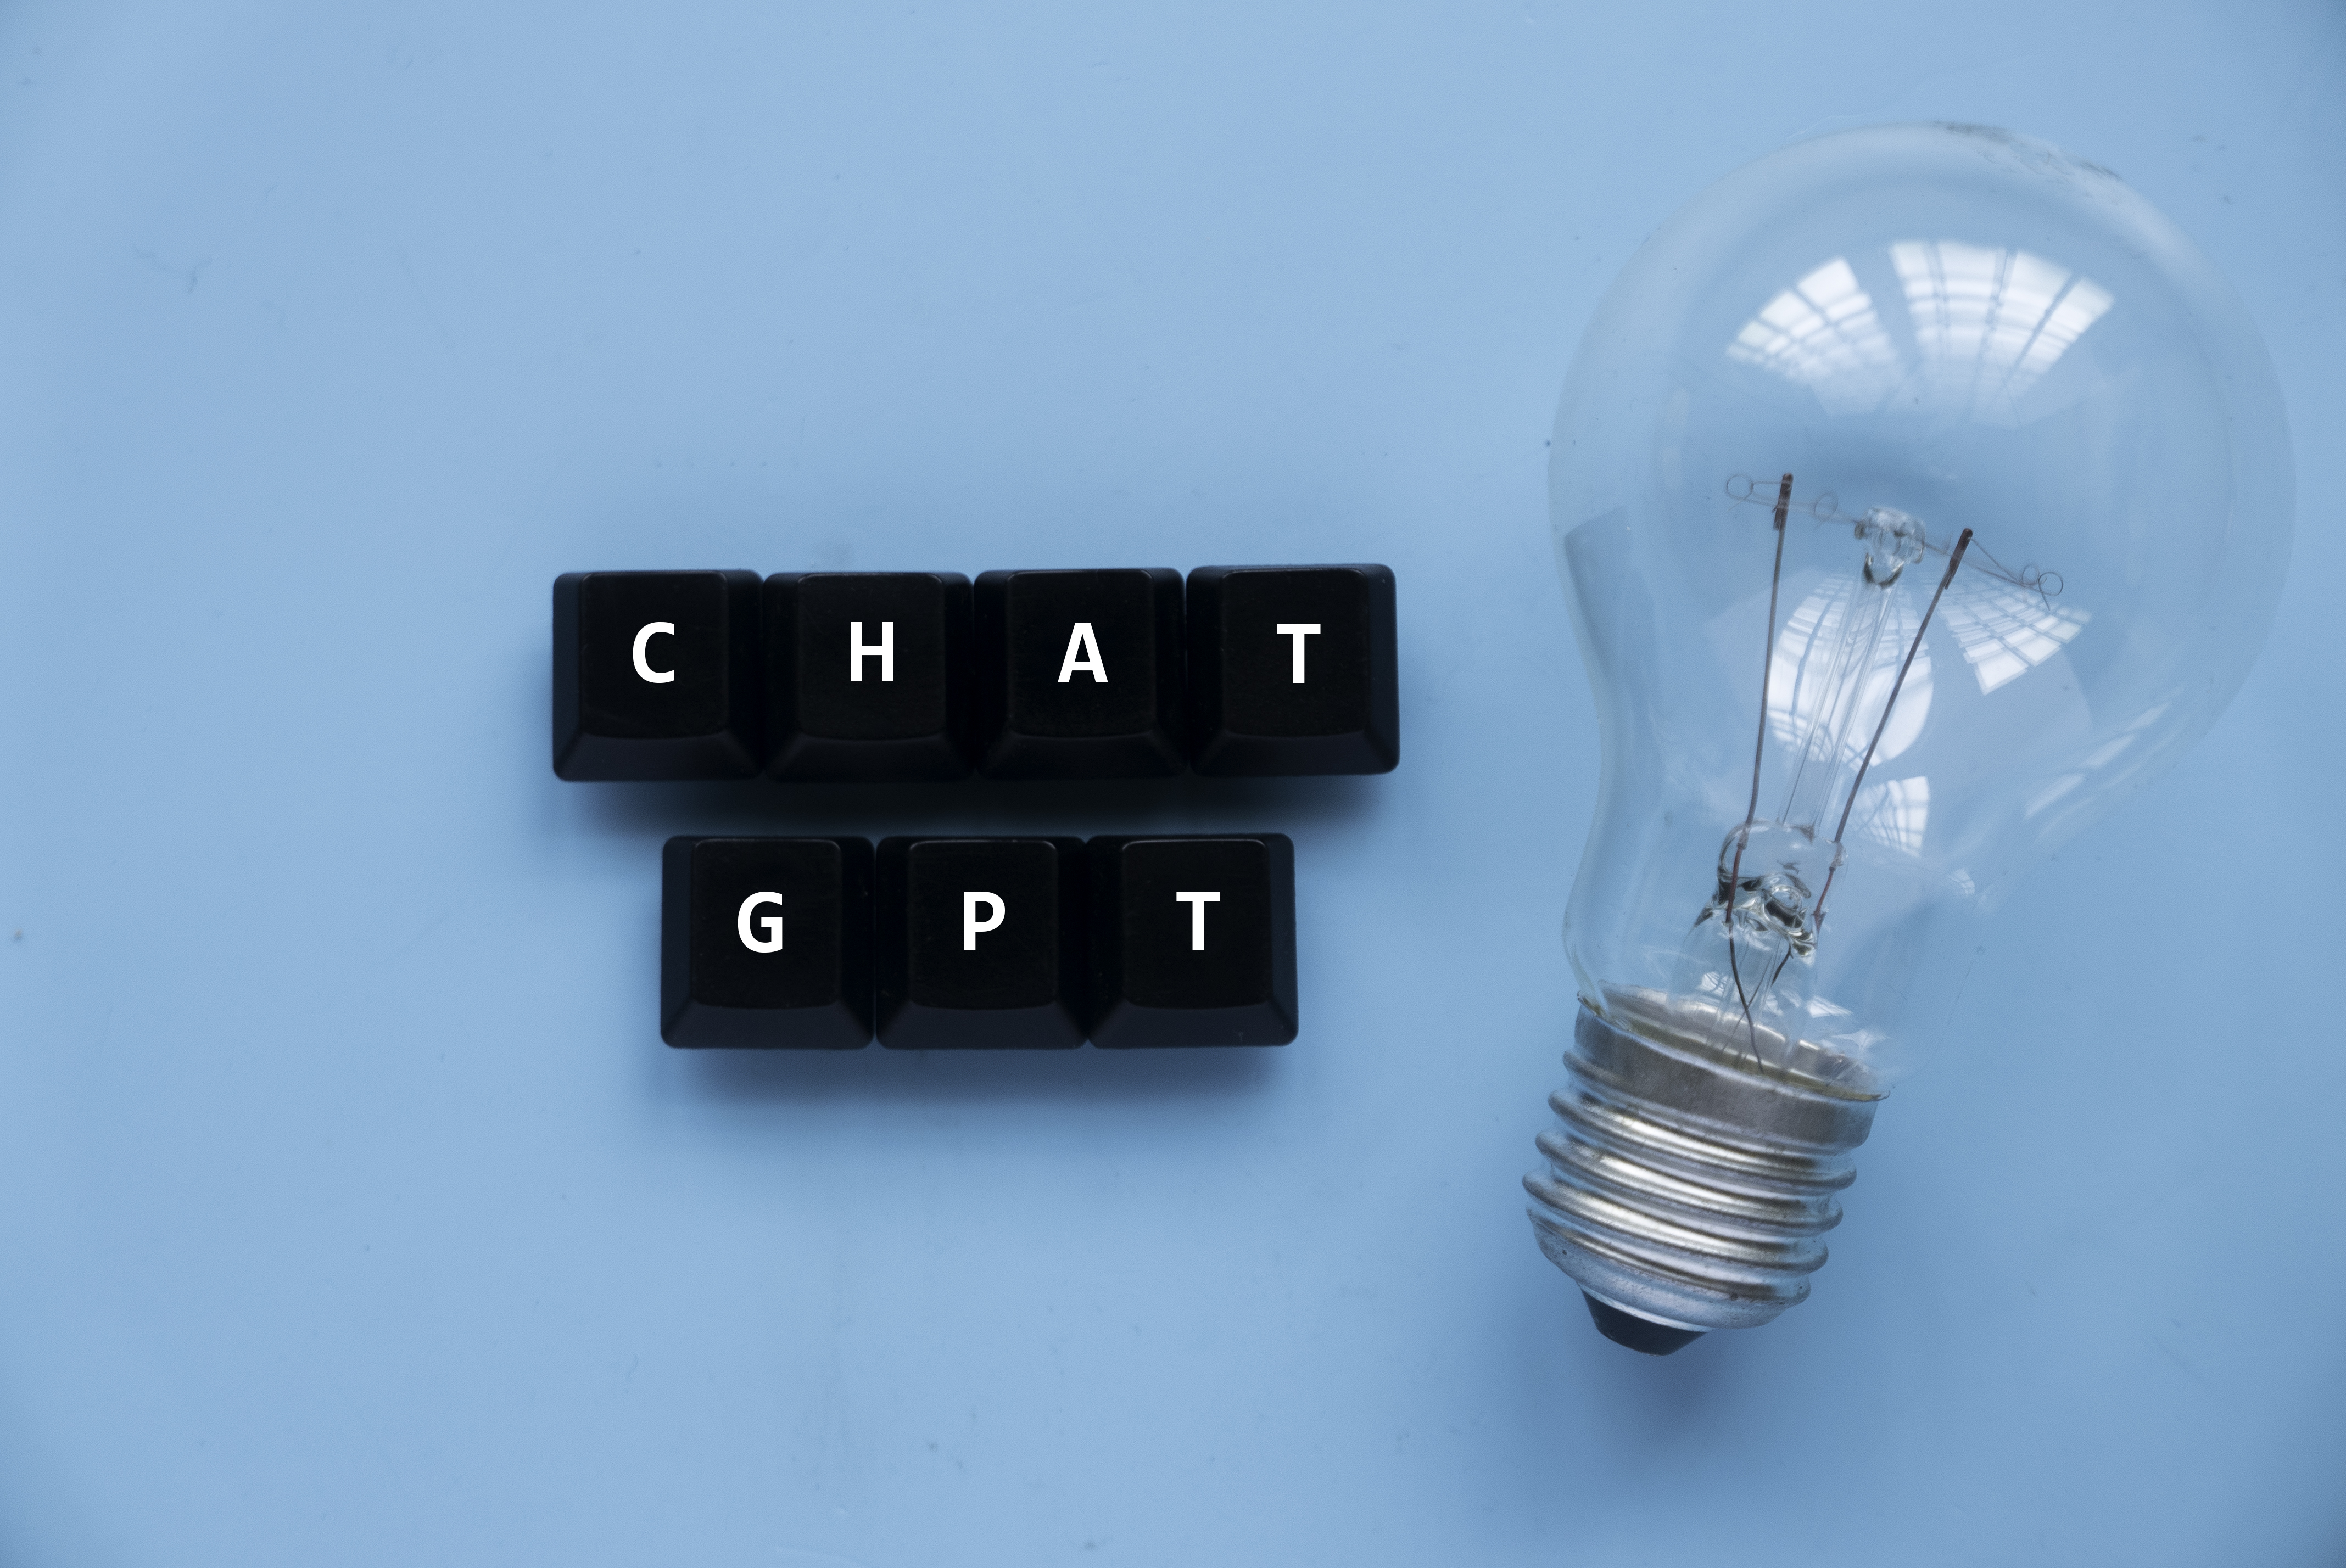 ChatGPT can be used to help you solve problems